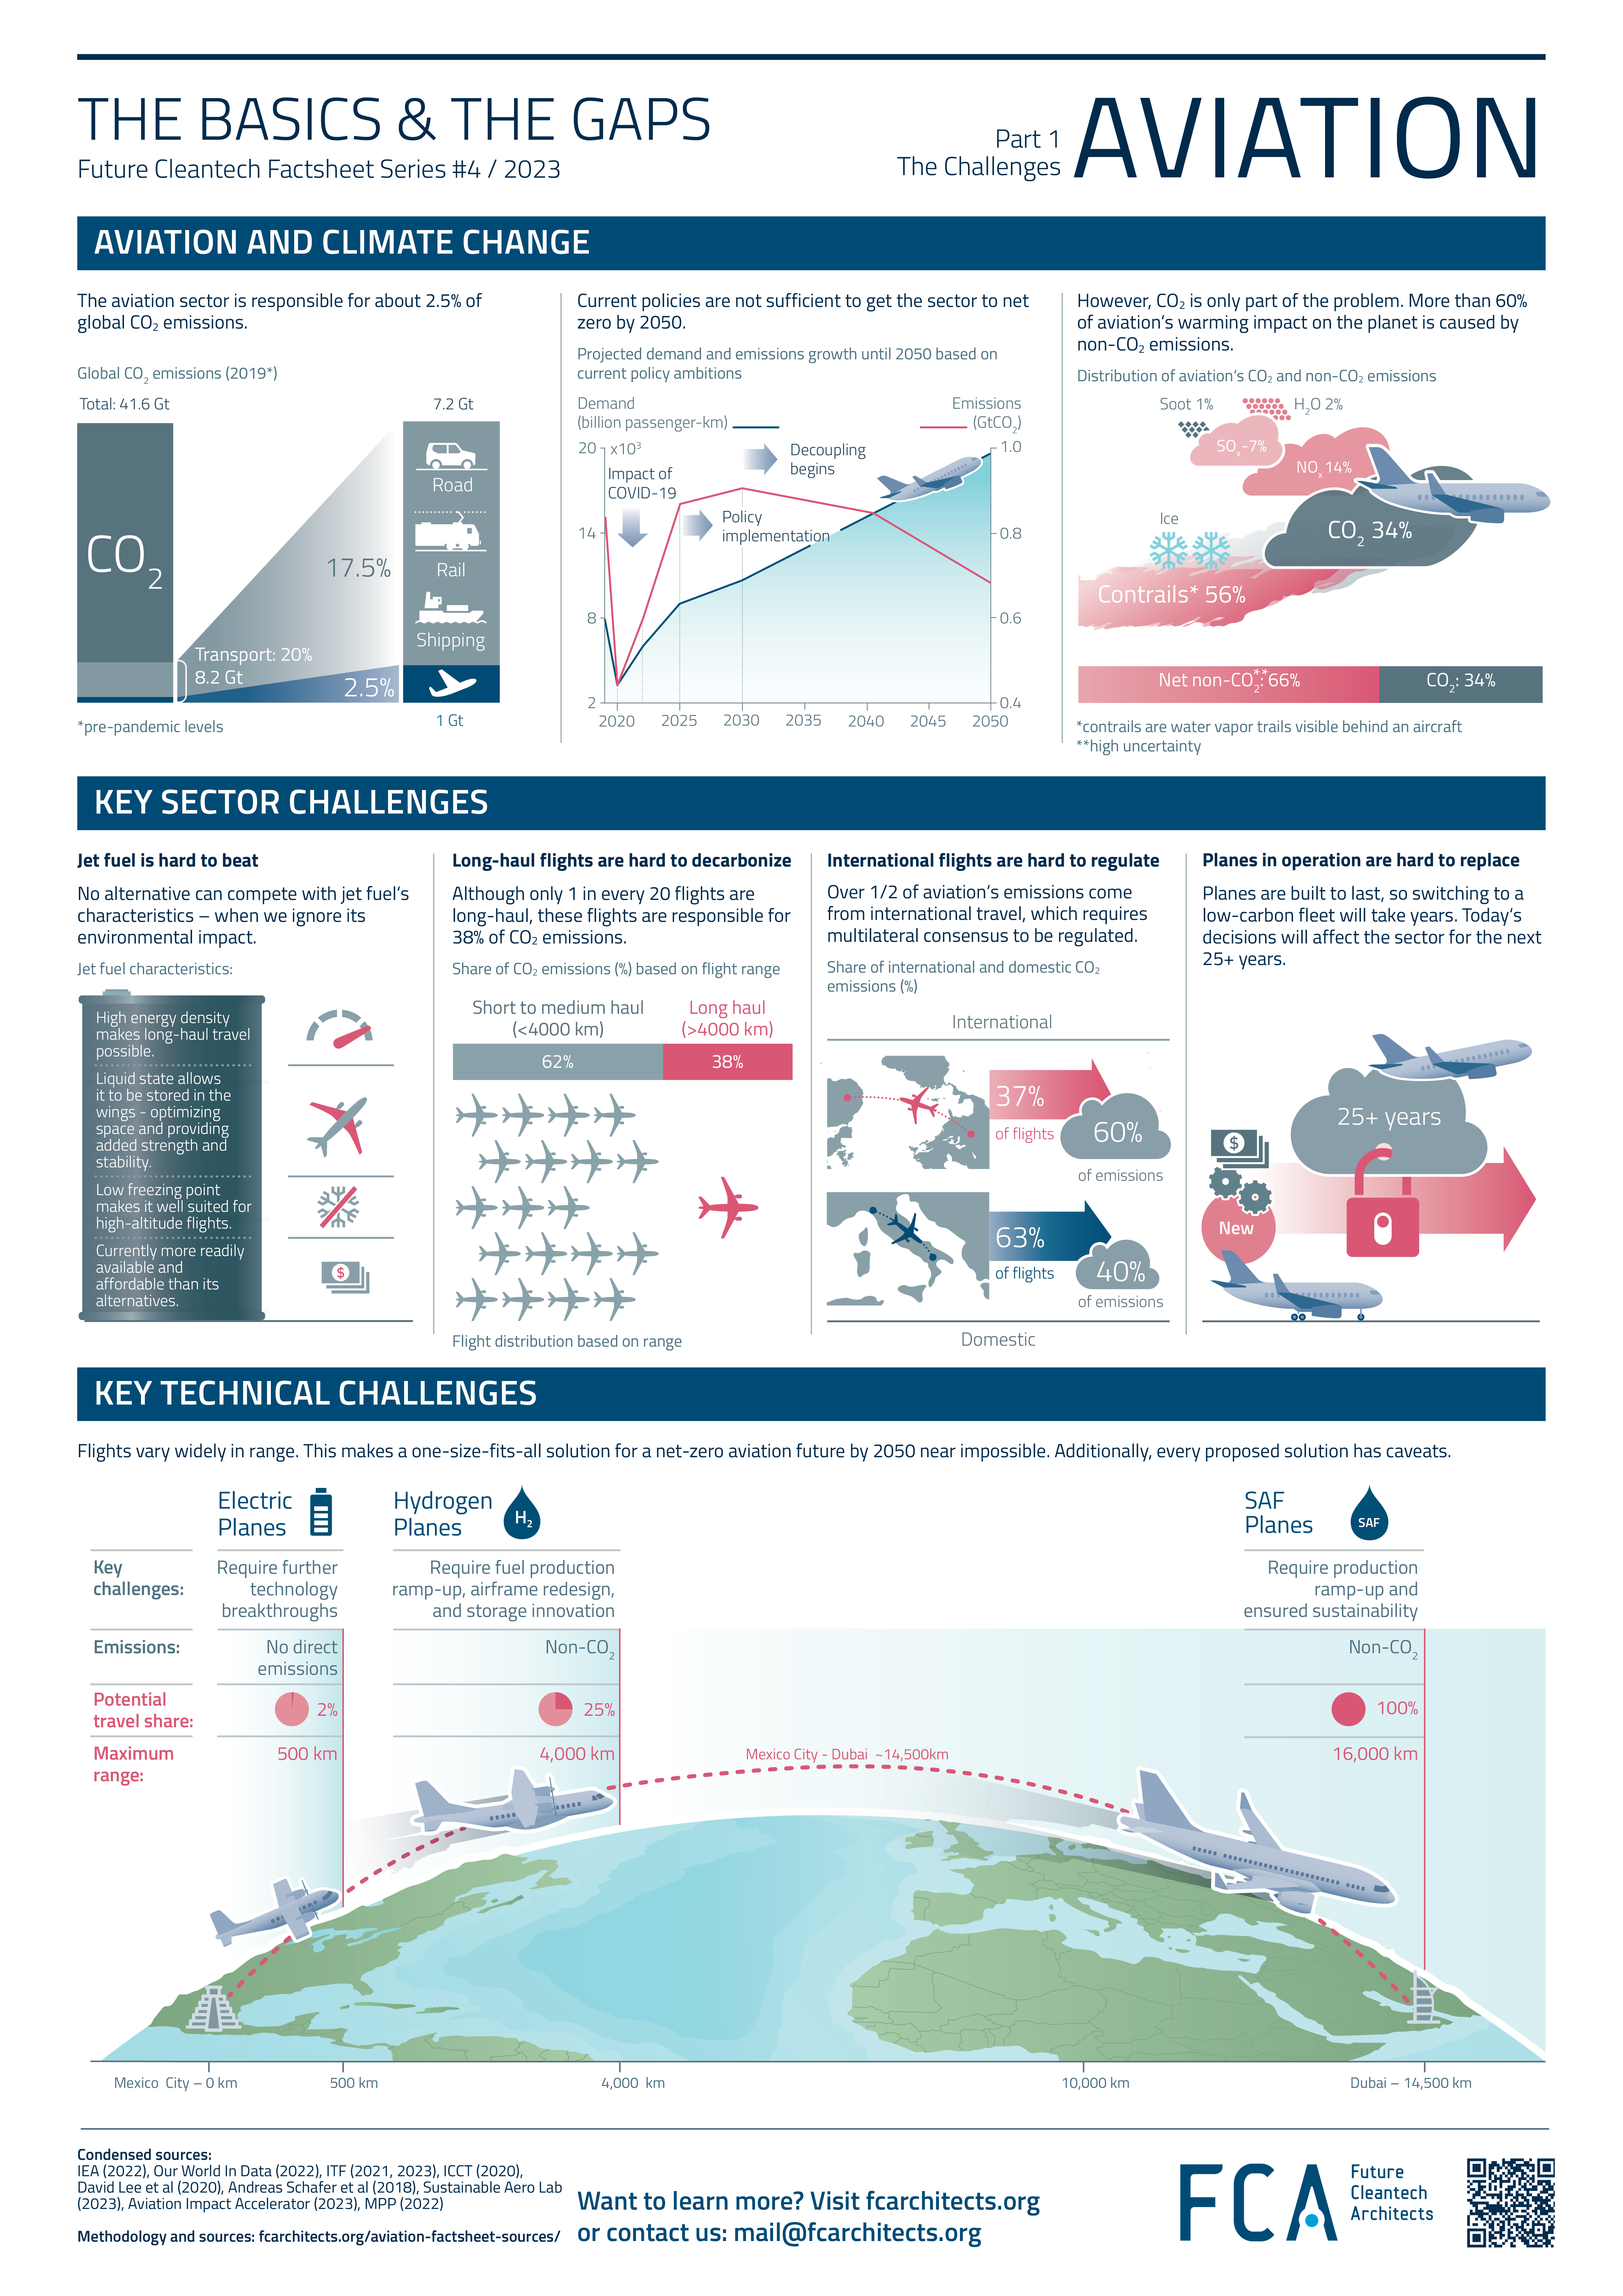 Hot off the press! New Future Cleantech Factsheet on Aviation is Out!